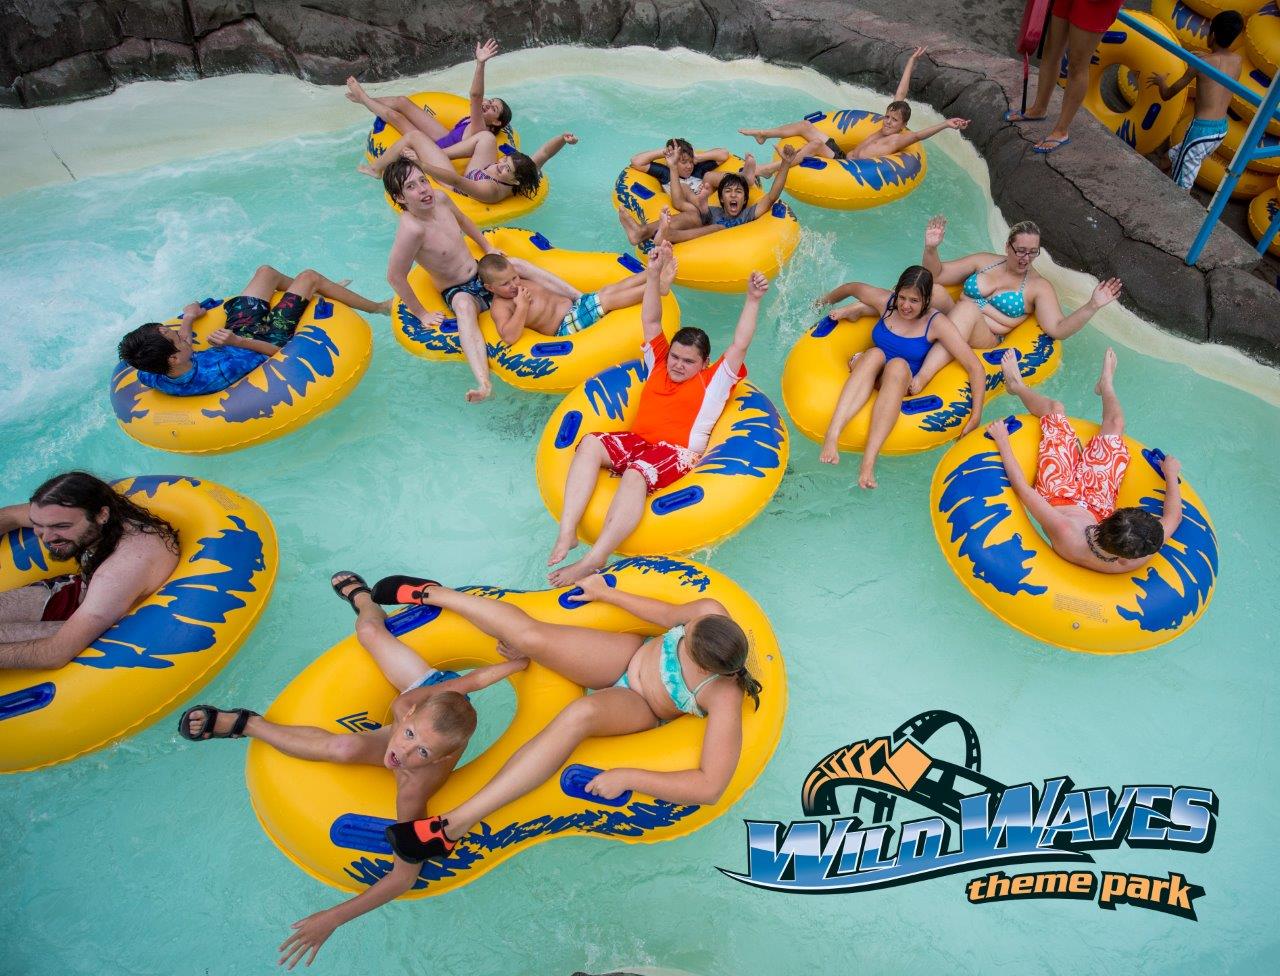 Summer Swimming Outdoor Pools And Water Parks Around Seattle